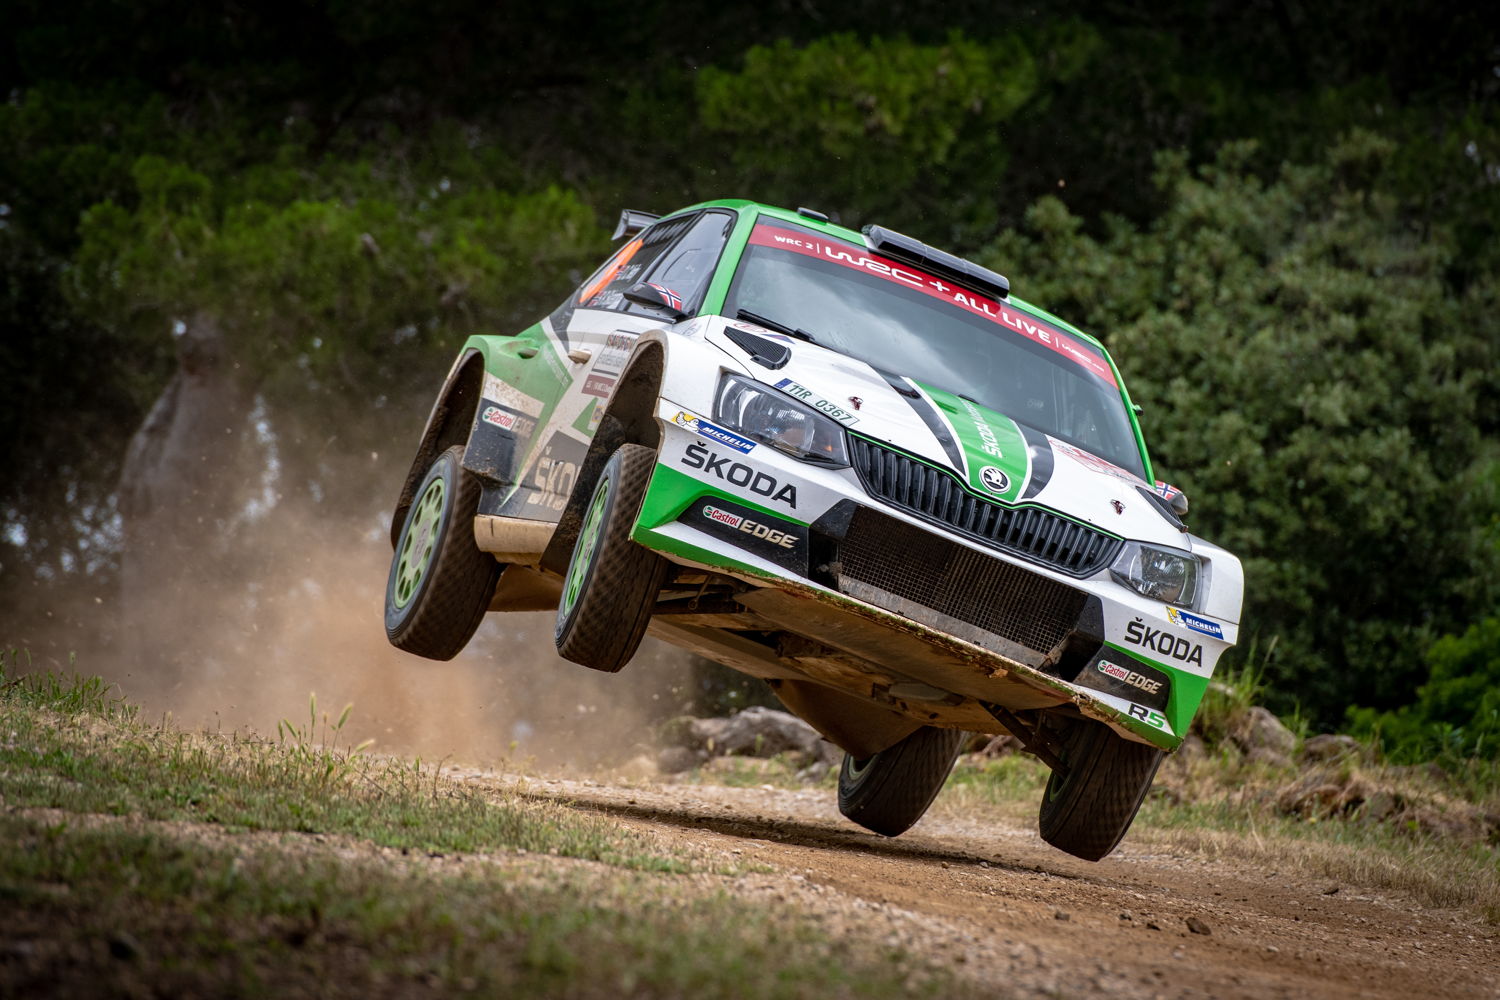 Norwegian ŠKODA juniors Ole Christian Veiby/Stig Rune Skjaermoen dropped from the lead in the WRC 2 category down to eight position due to suspension issues